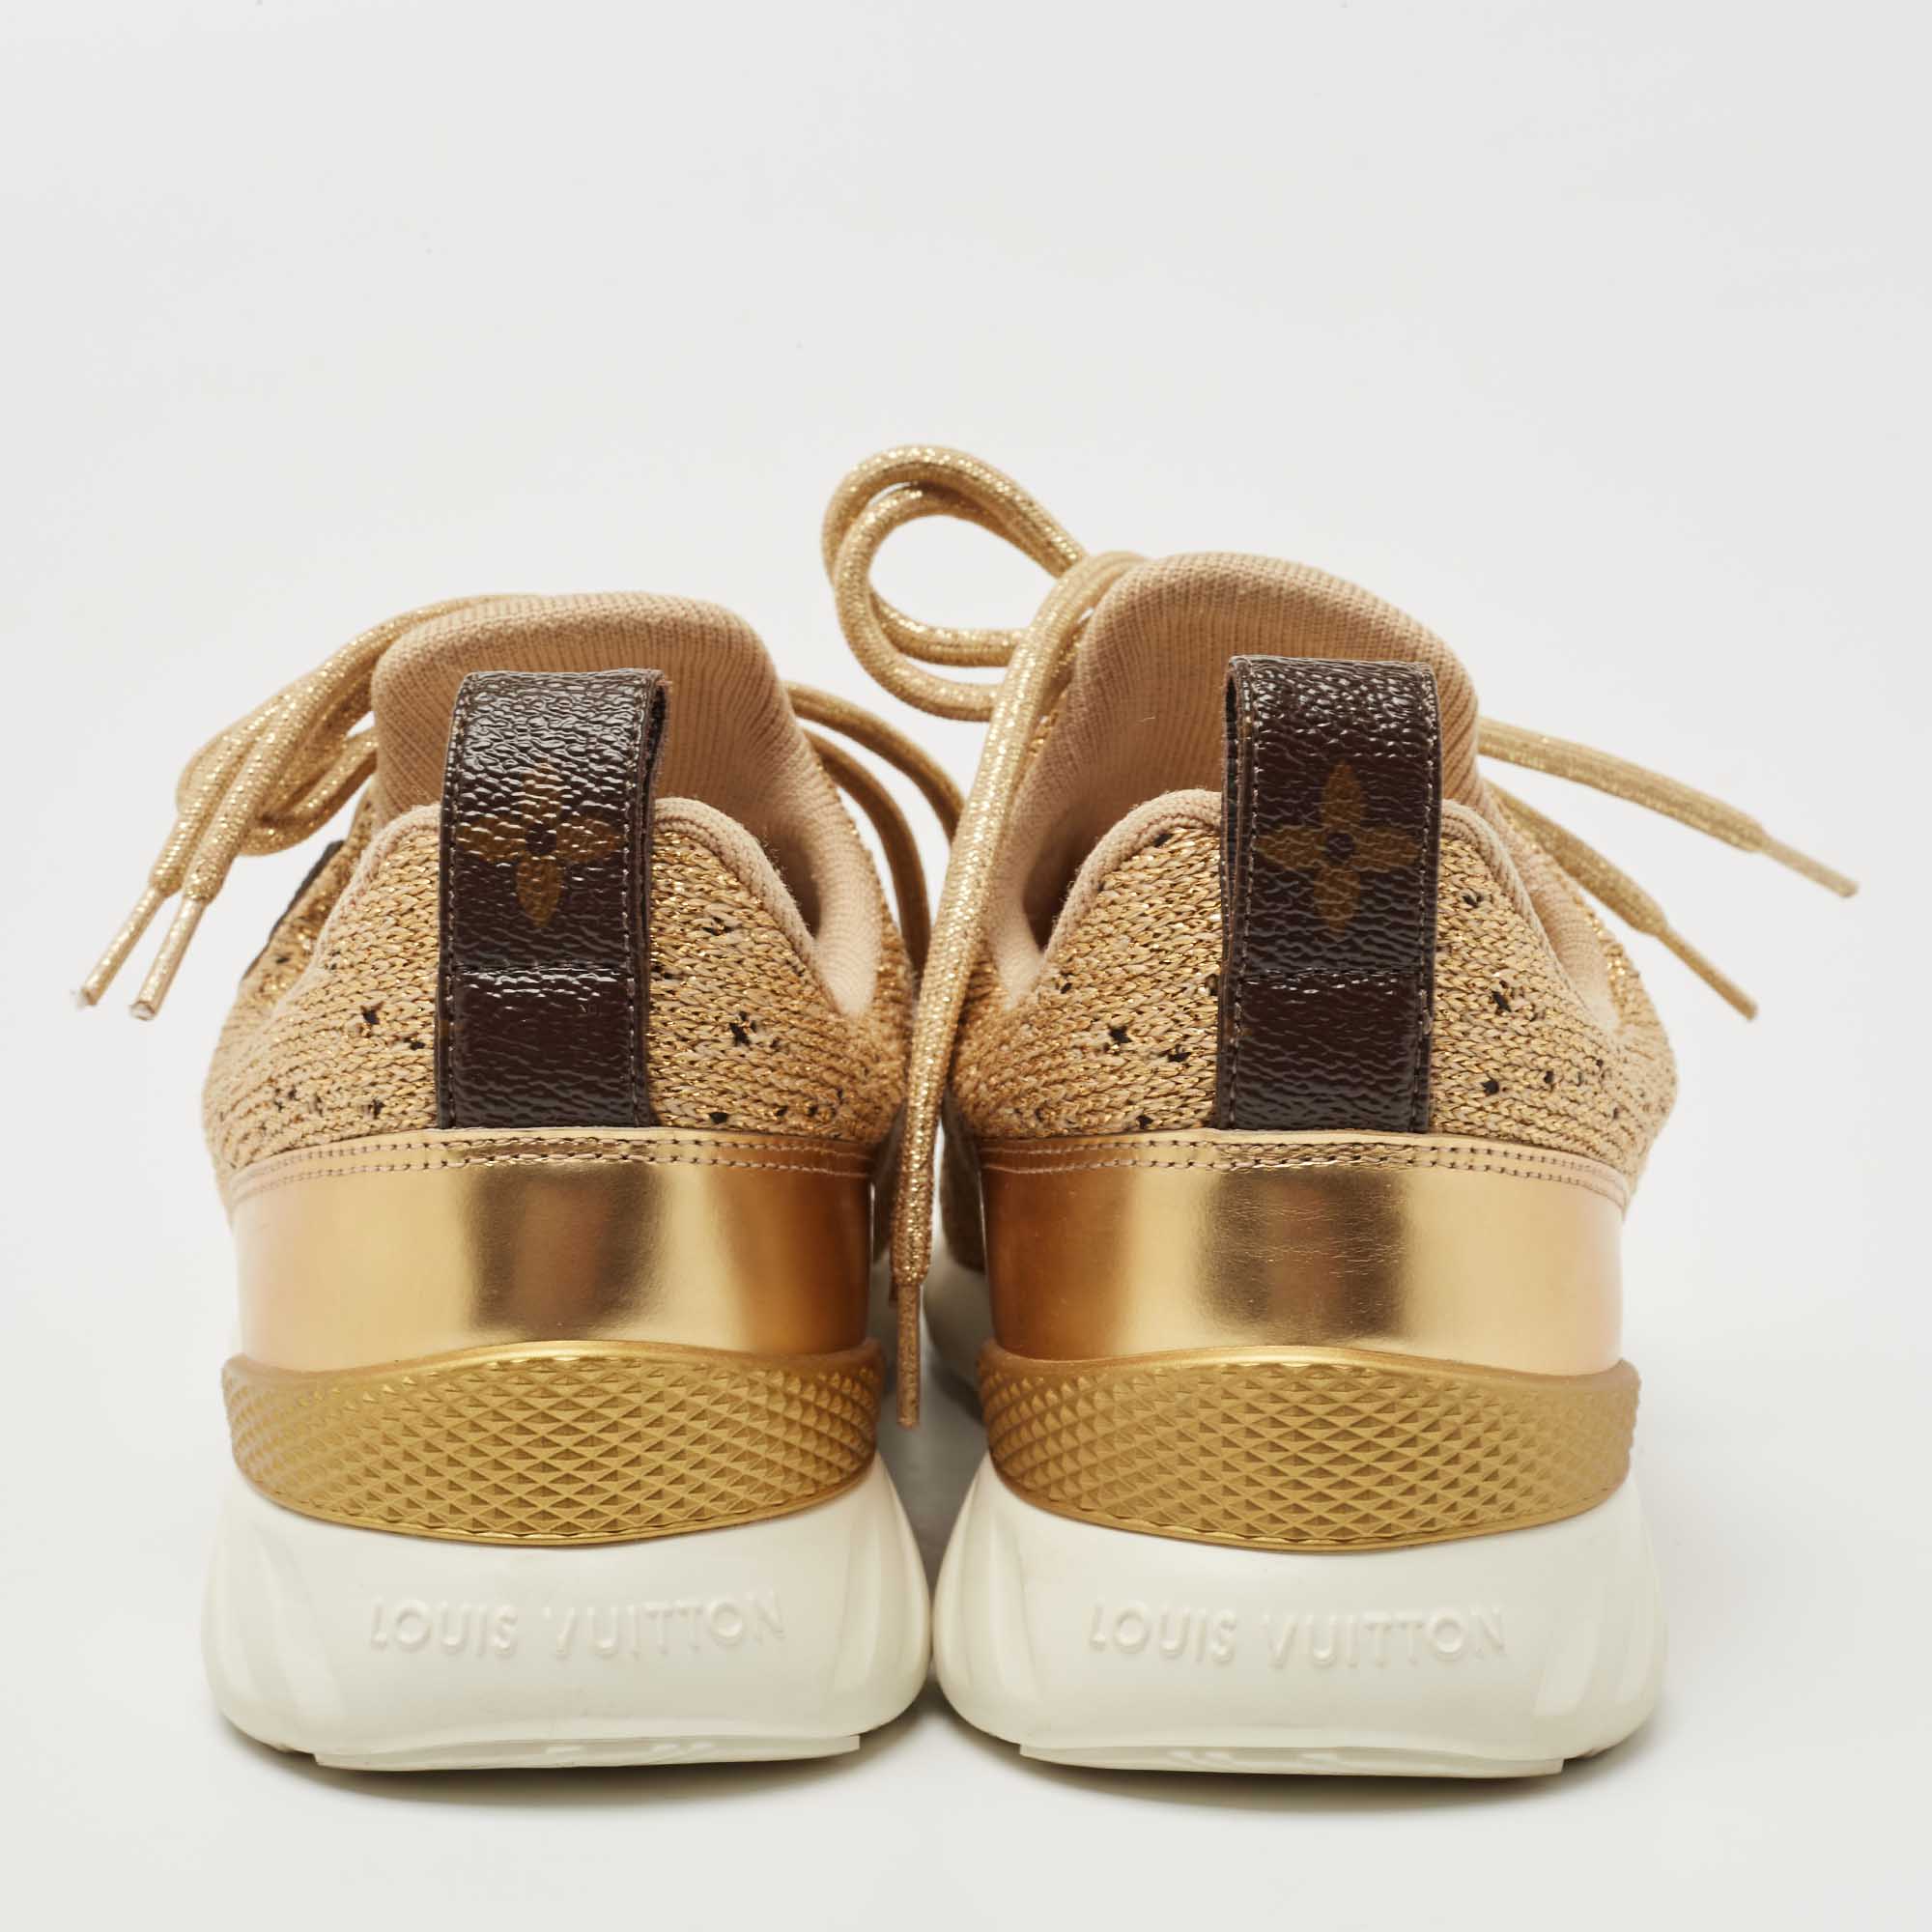 Louis Vuitton Aftergame Sneaker in Gold - Women Shoes 1A8NDN - $131.30 